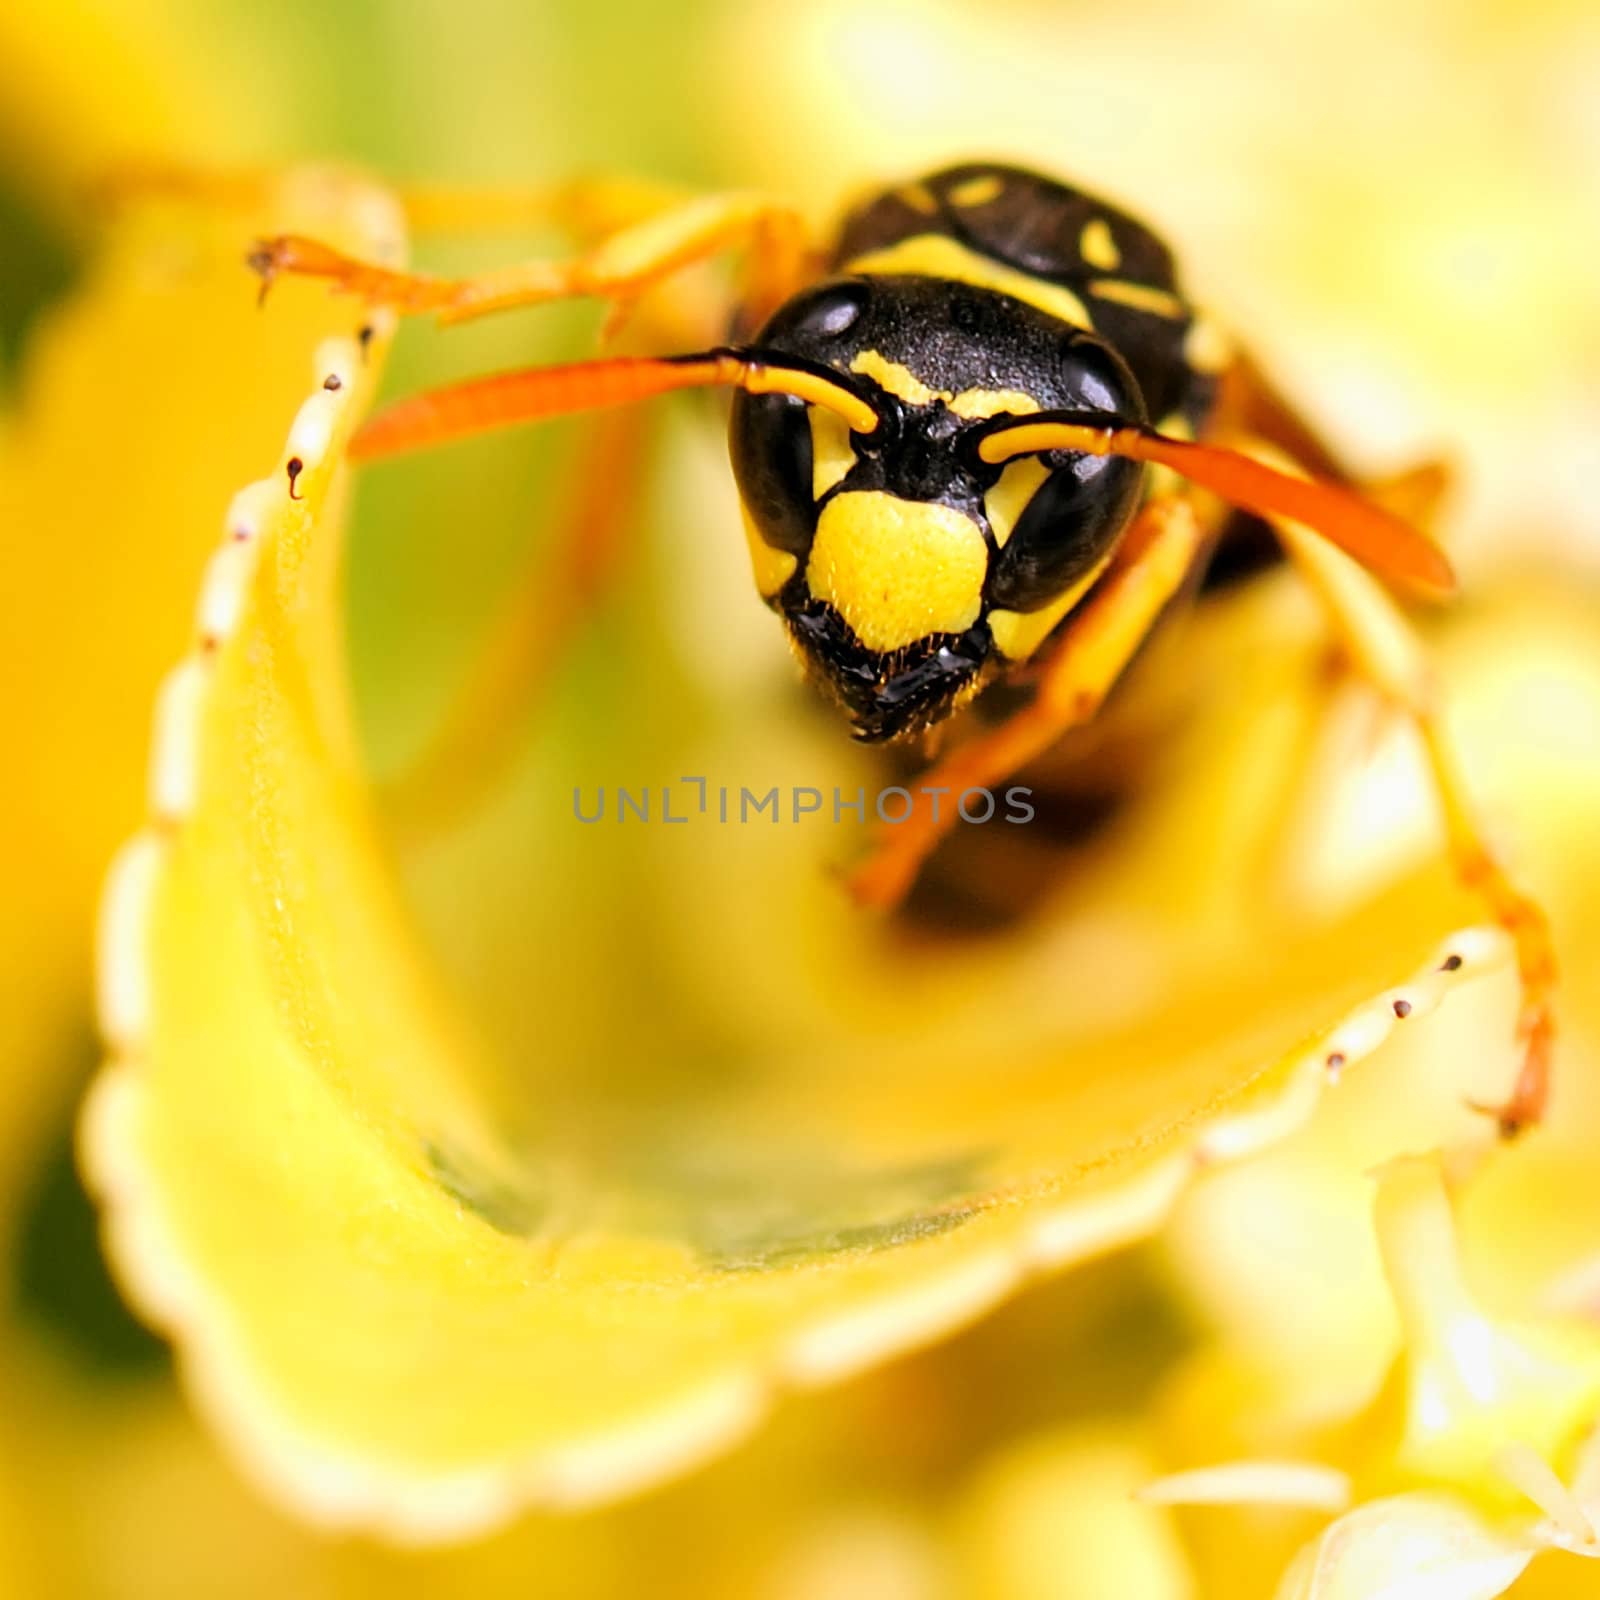 Clos-up photo of a wasp in a yellow flower. Shallow depth of field.